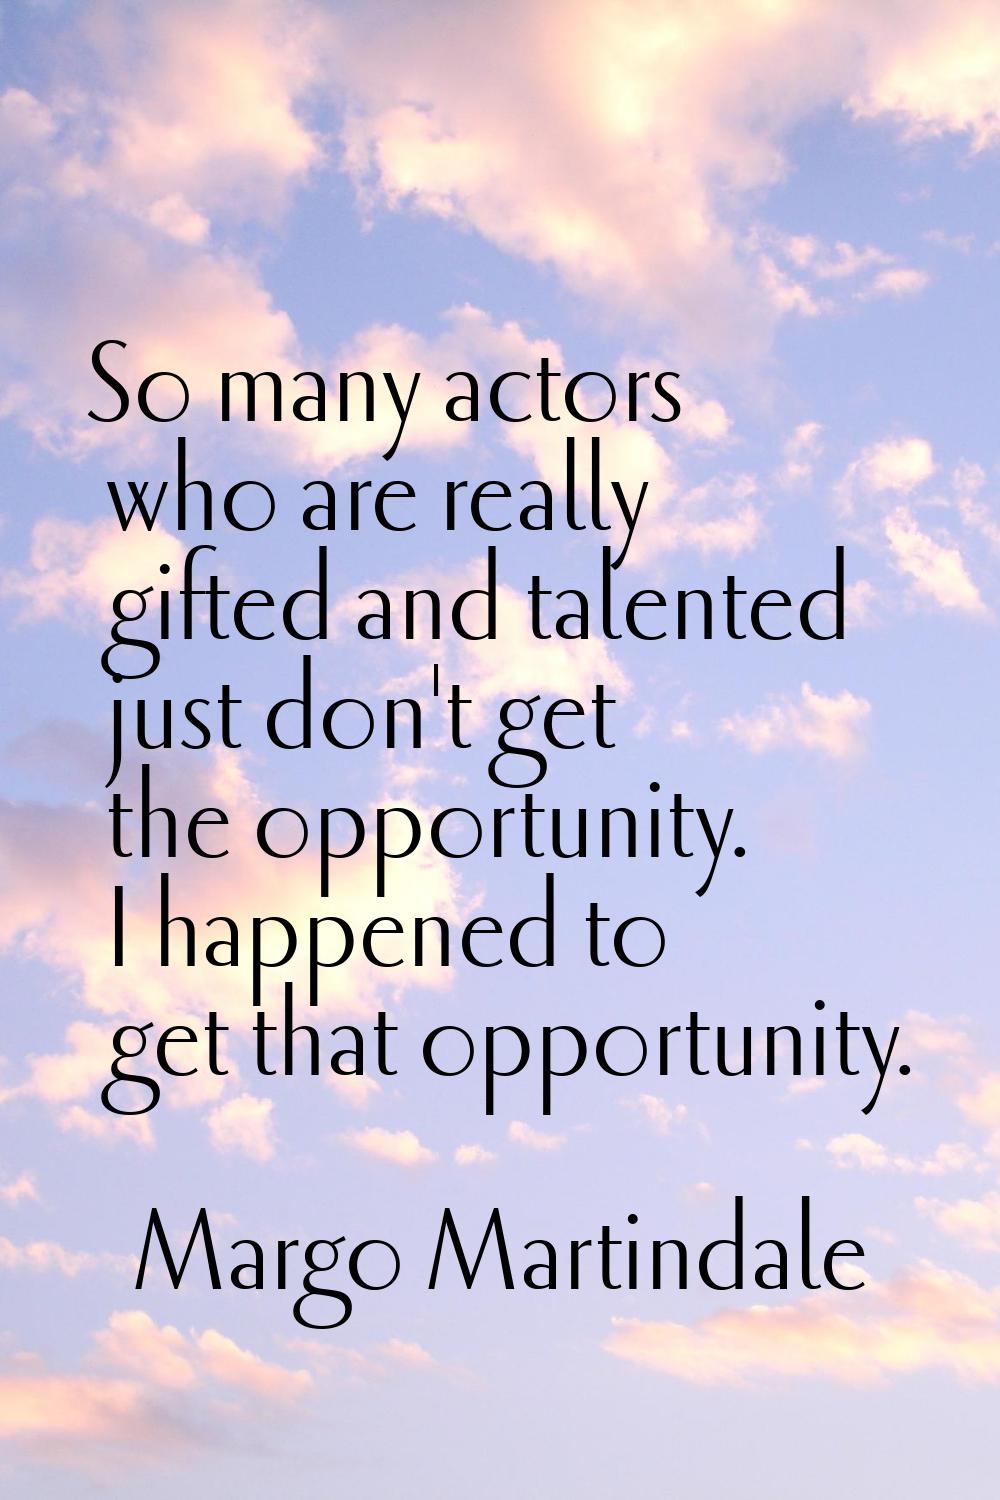 So many actors who are really gifted and talented just don't get the opportunity. I happened to get